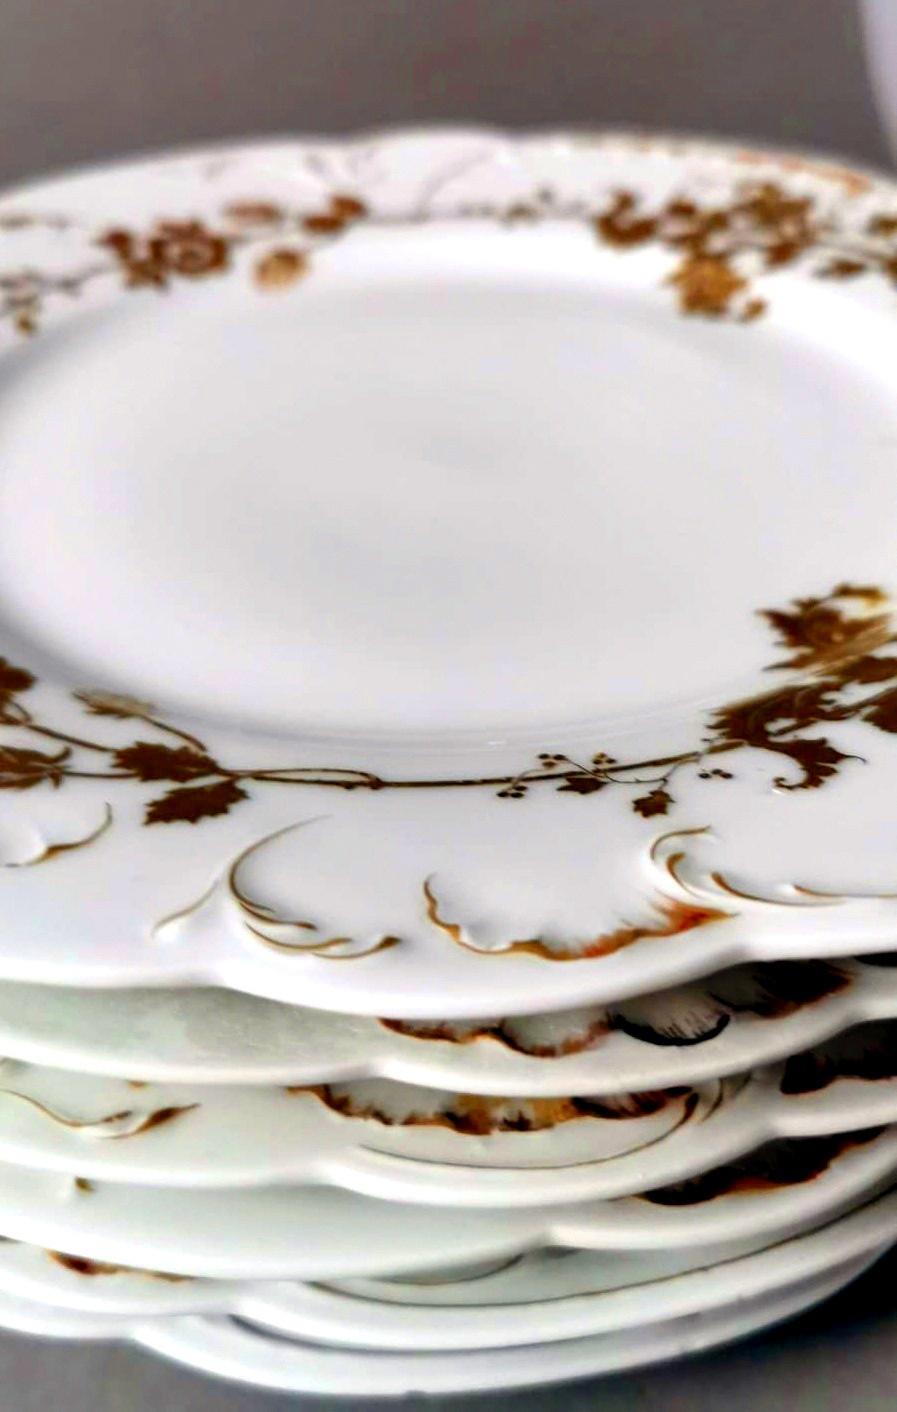 Haviland Limoges 6 French White Porcelain Flat Plates and Gold Decorations In Good Condition For Sale In Prato, Tuscany